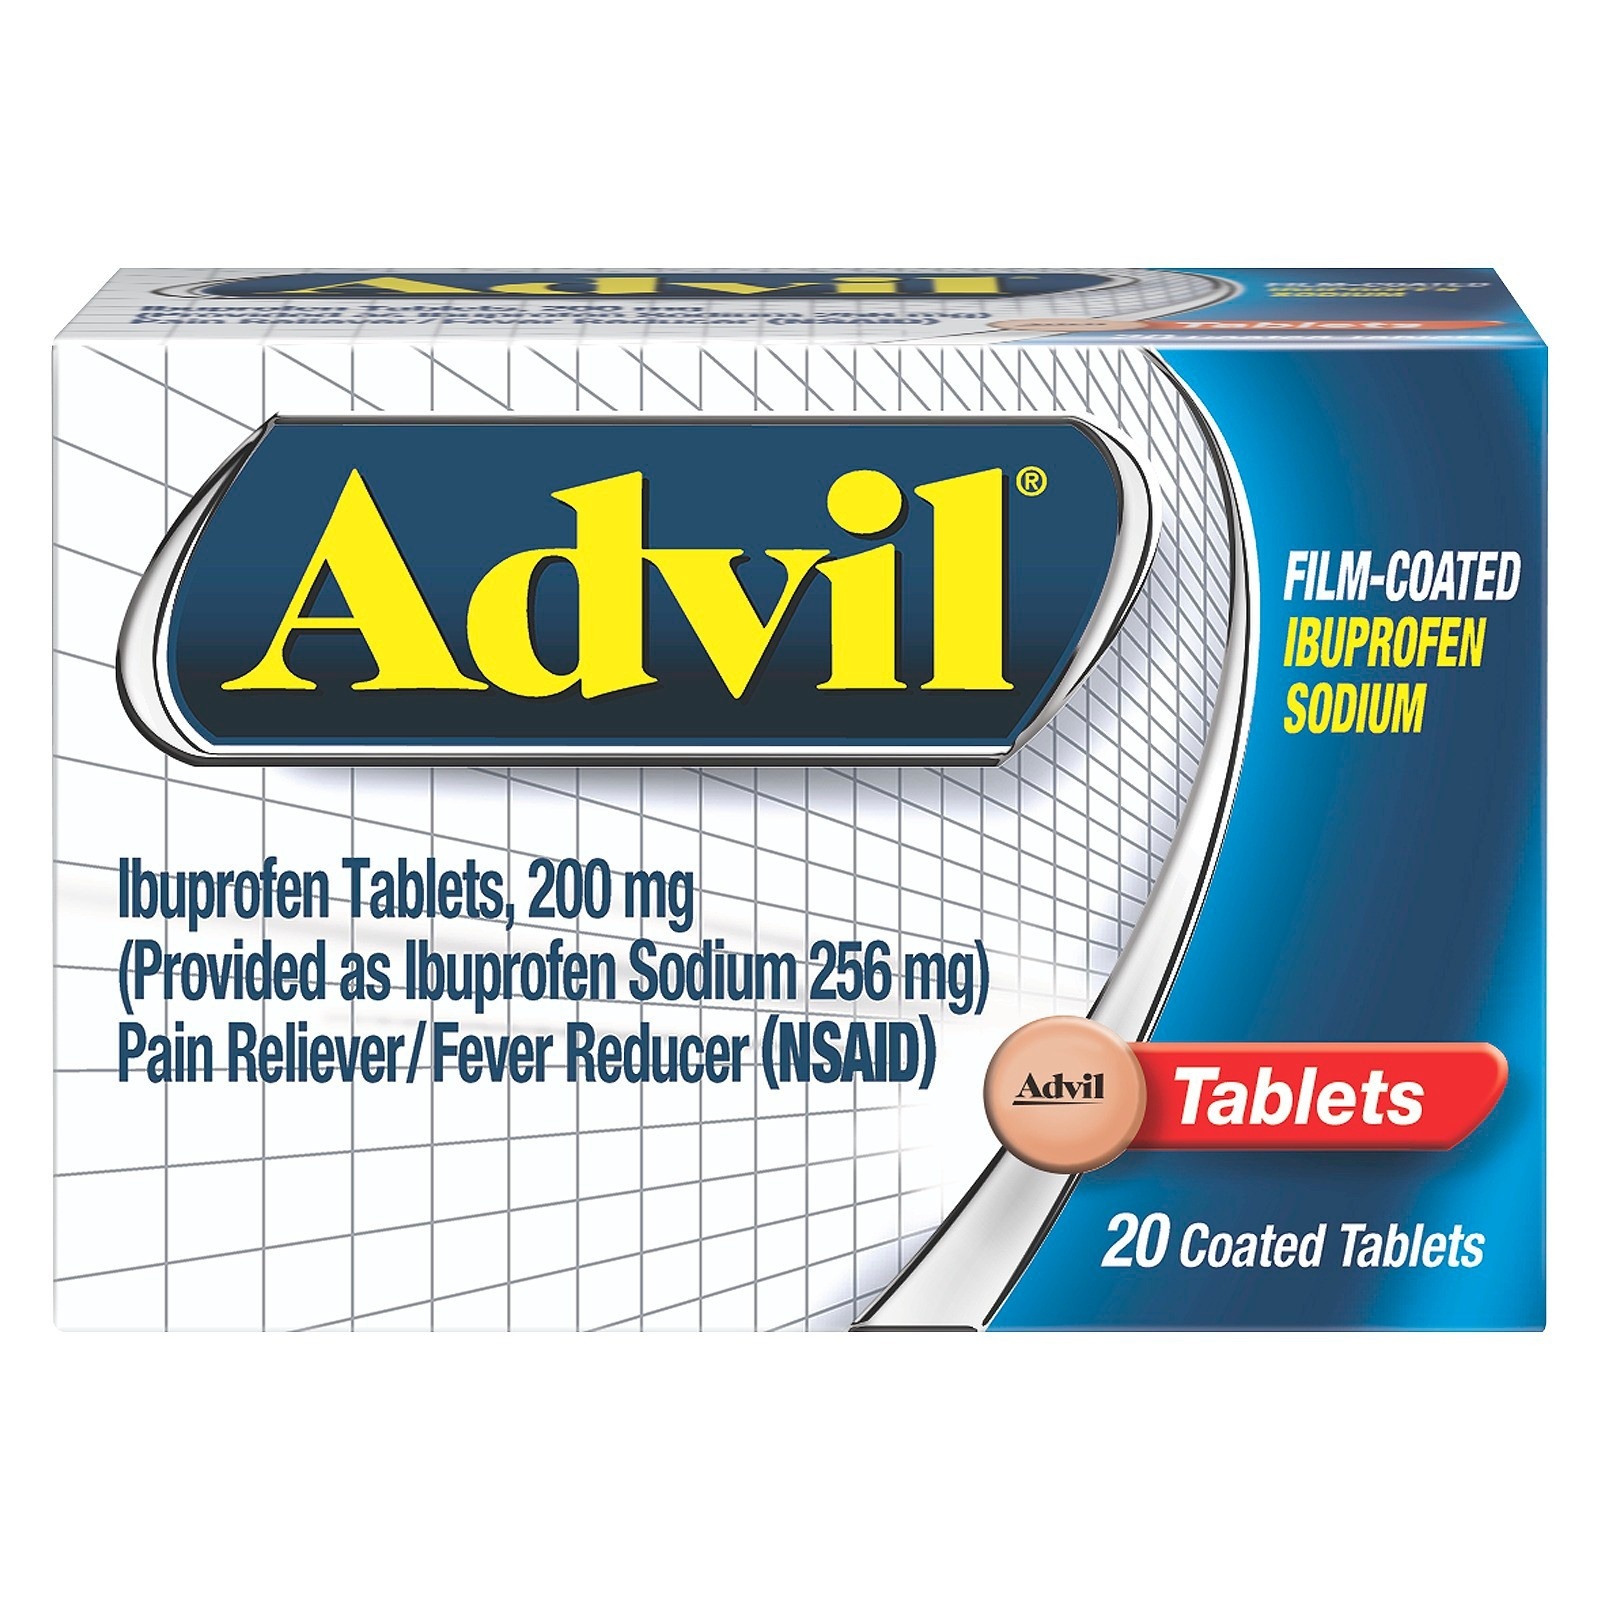 slide 1 of 7, Advil Pain Reliever And Fever Reducer Film Coated Tablets - Ibuprofen (NSAID), 20 ct